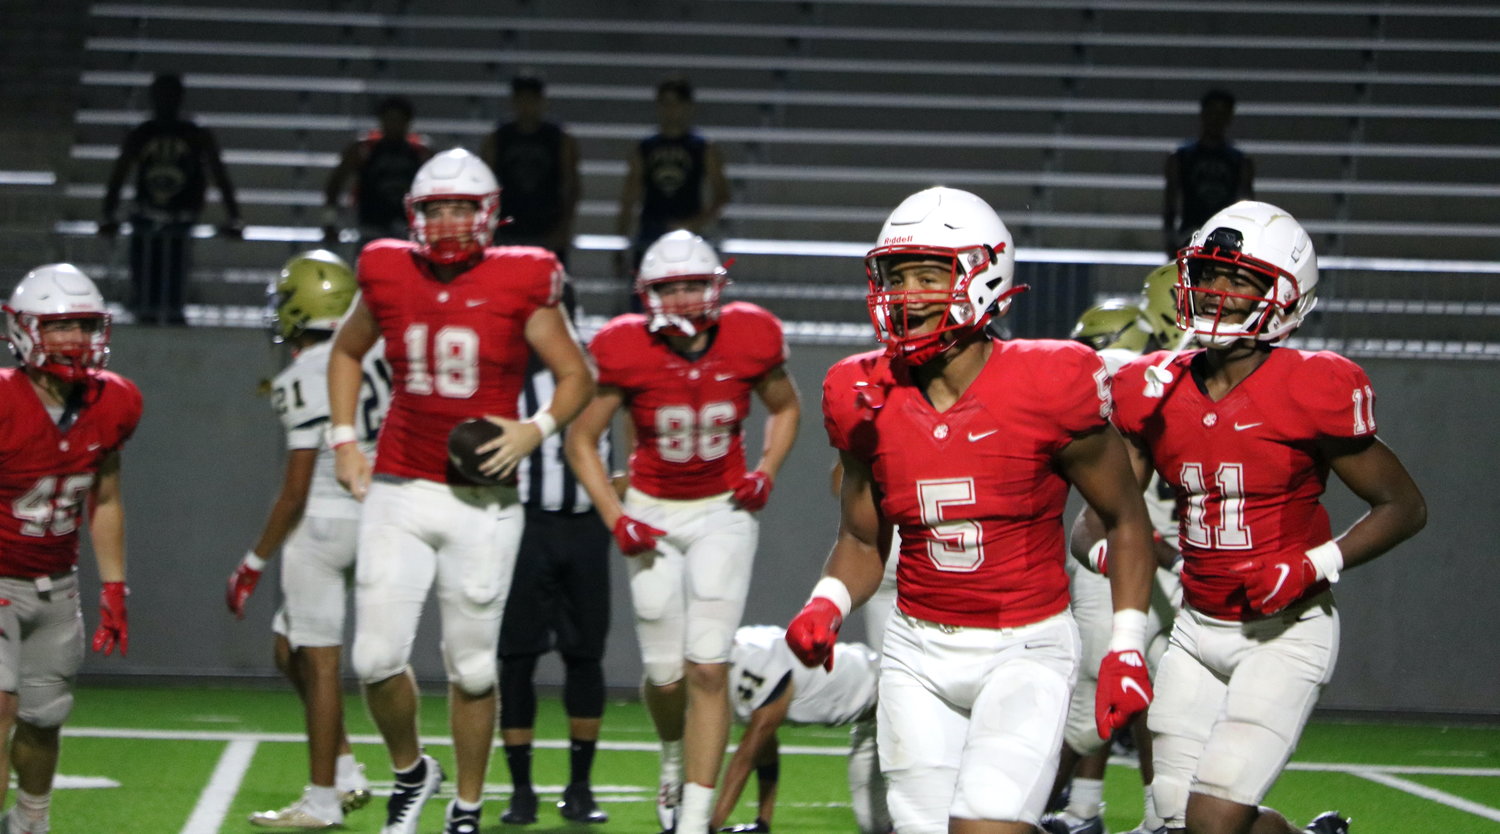 Katy’s defense celebrates after forcing and recovering a fumble during Katy’s scrimmage against Klein Collins on Friday at Legacy Stadium.